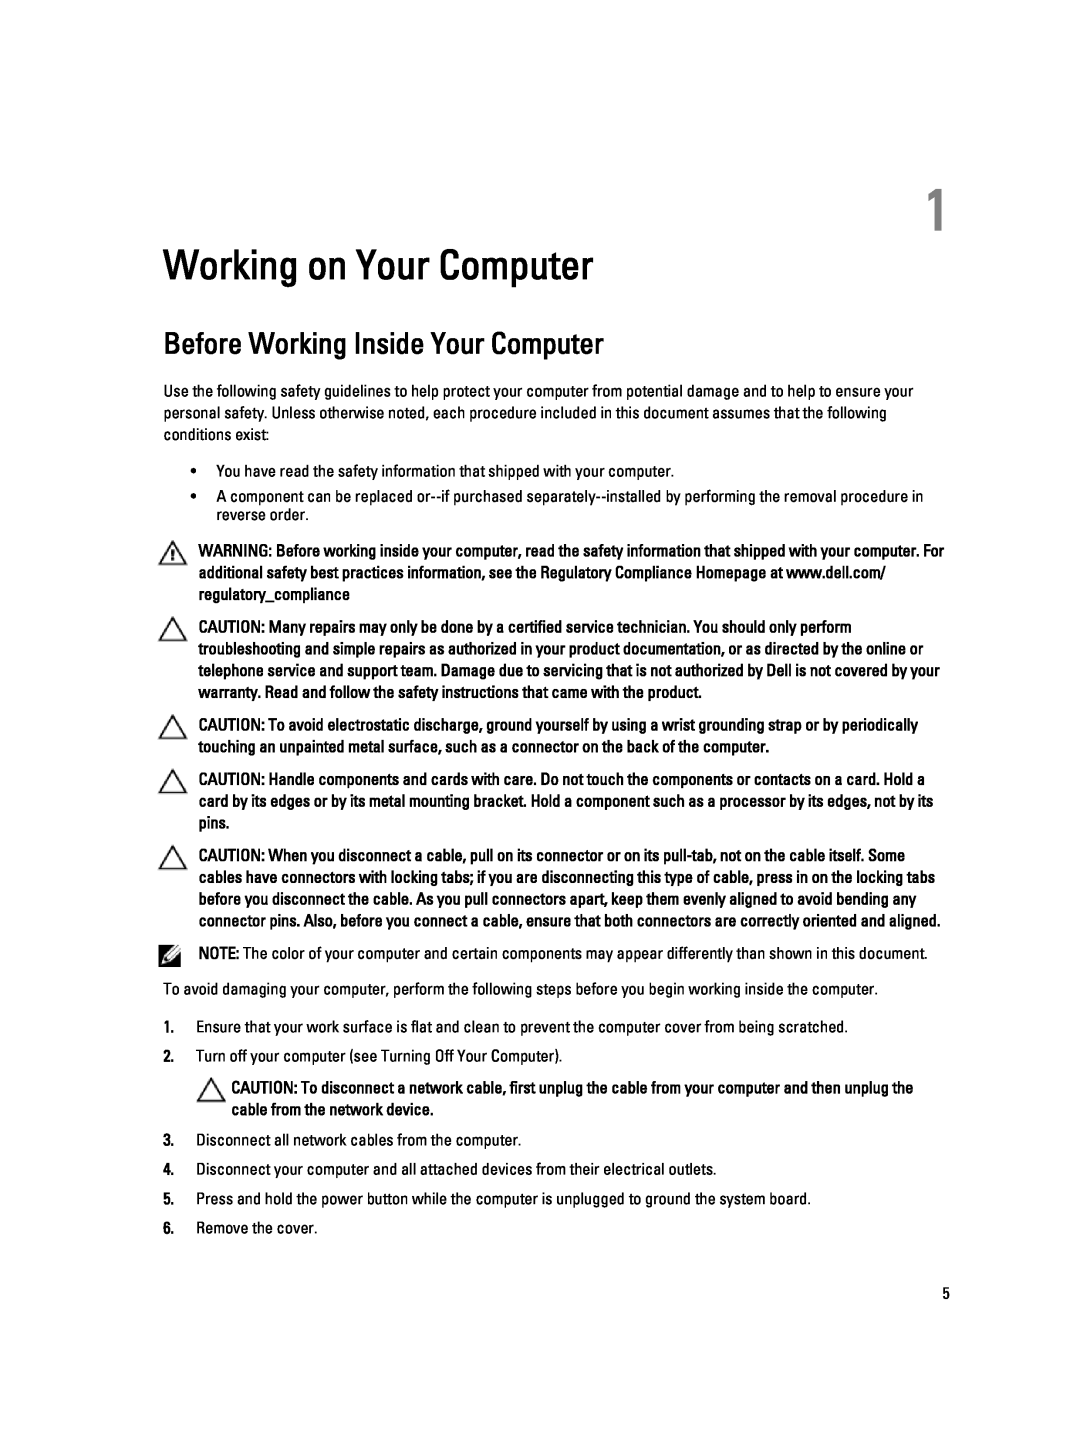 Dell T1700 owner manual Working on Your Computer, Before Working Inside Your Computer 